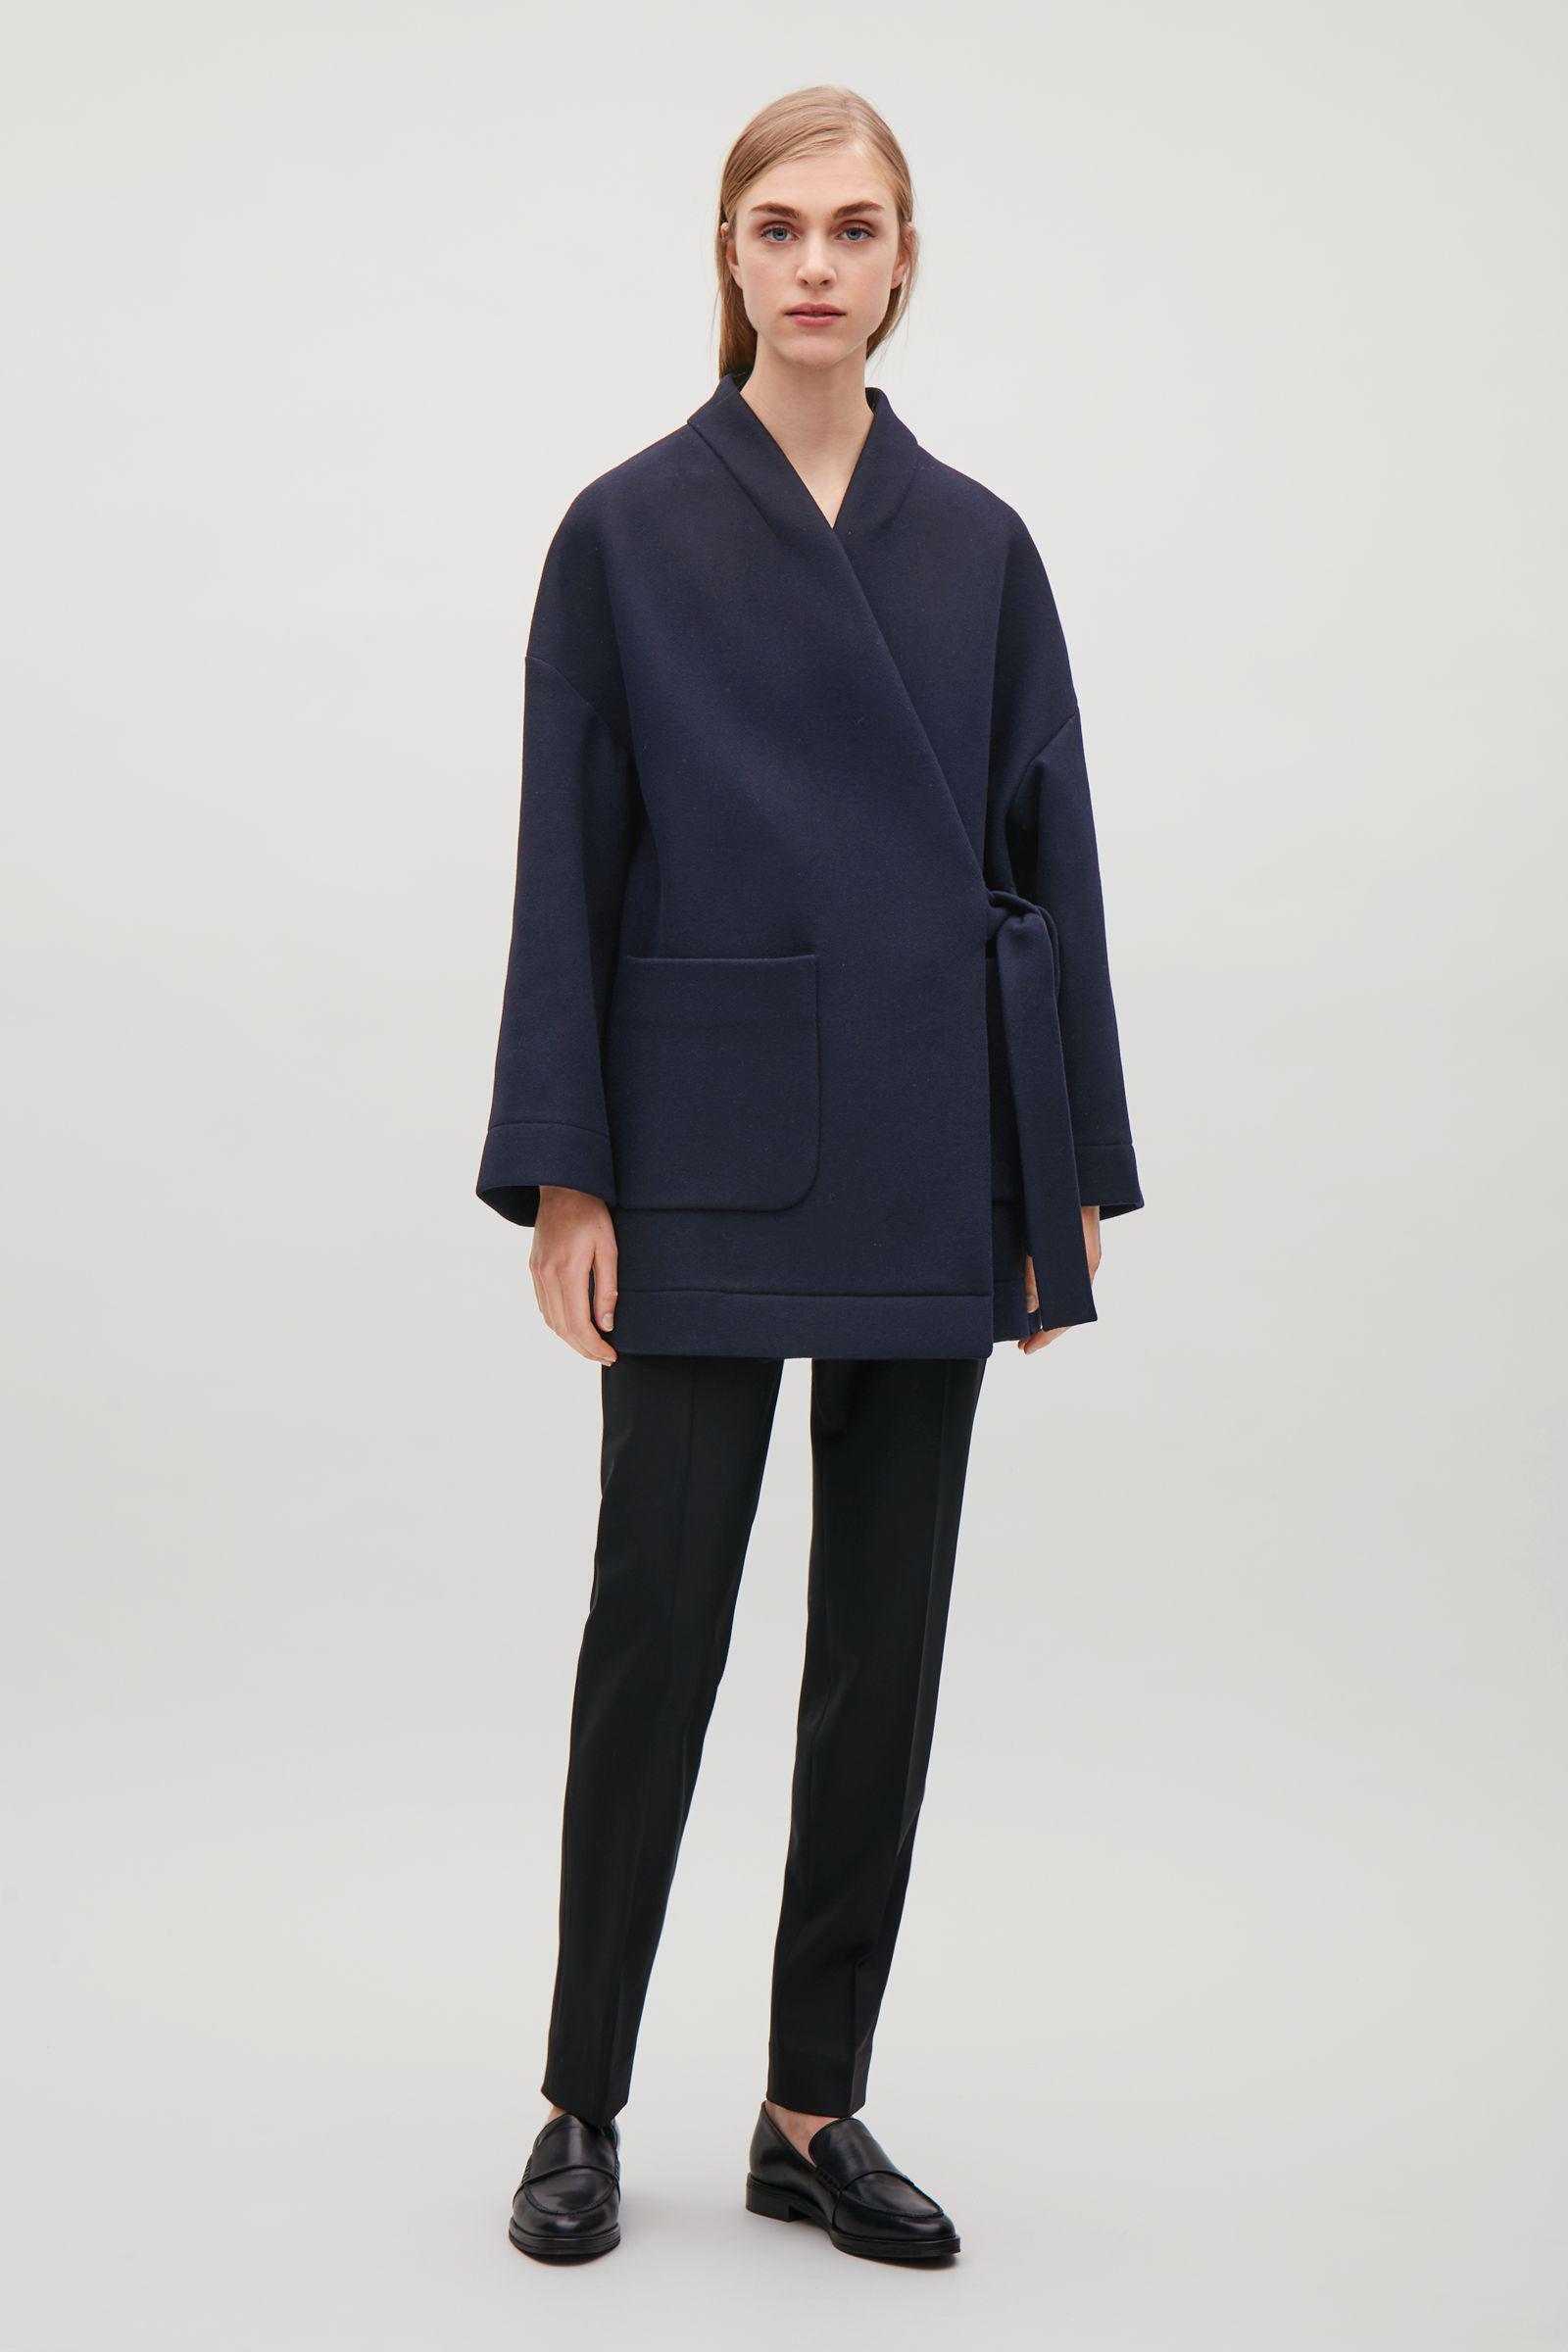 COS Kimono Coat With Side Tie in Blue | Lyst